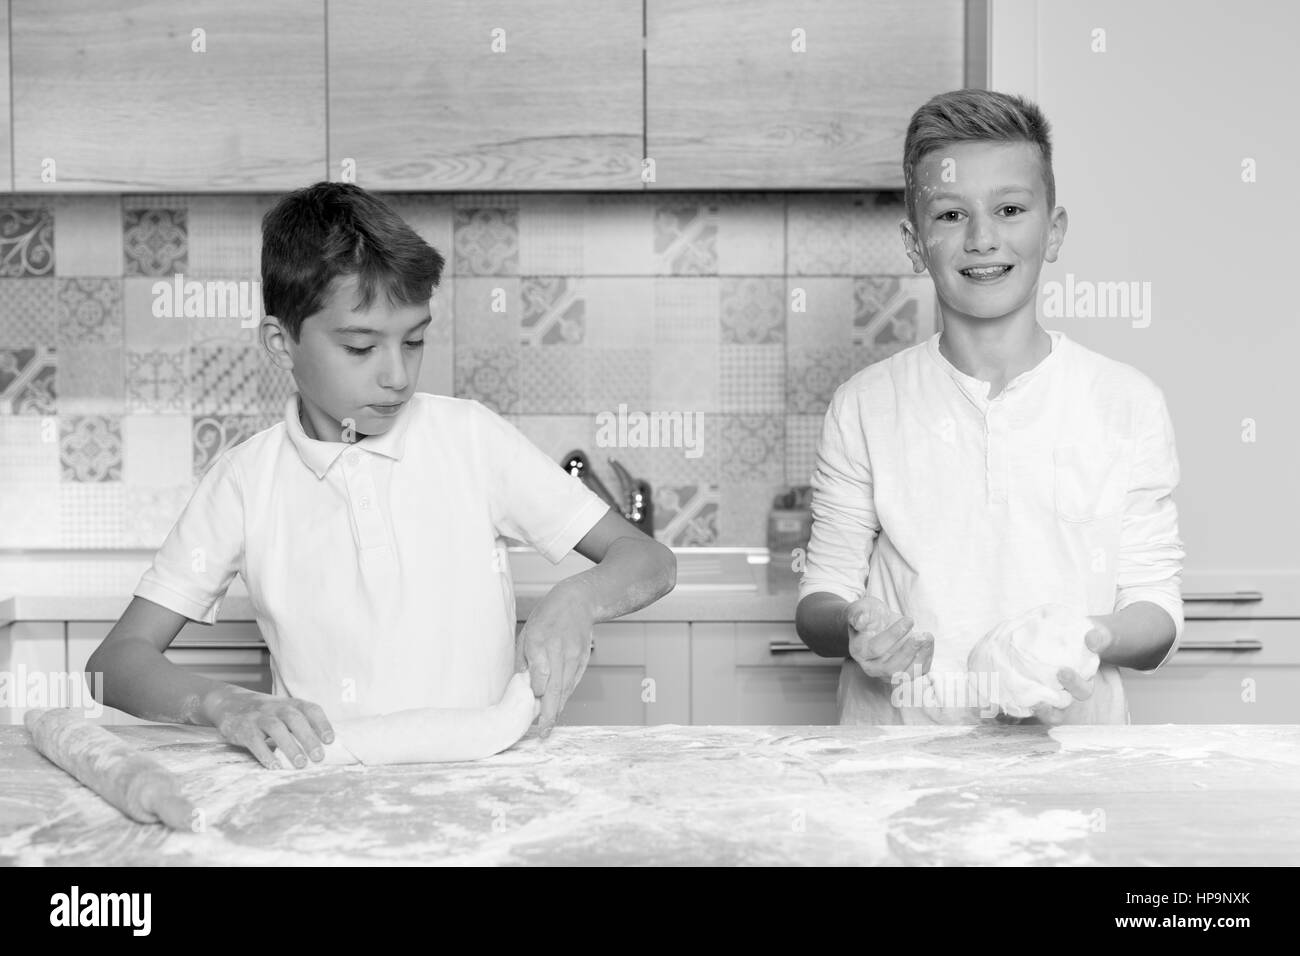 Two children having fun baking in the kitchen, Two brothers playing in kitchen Stock Photo